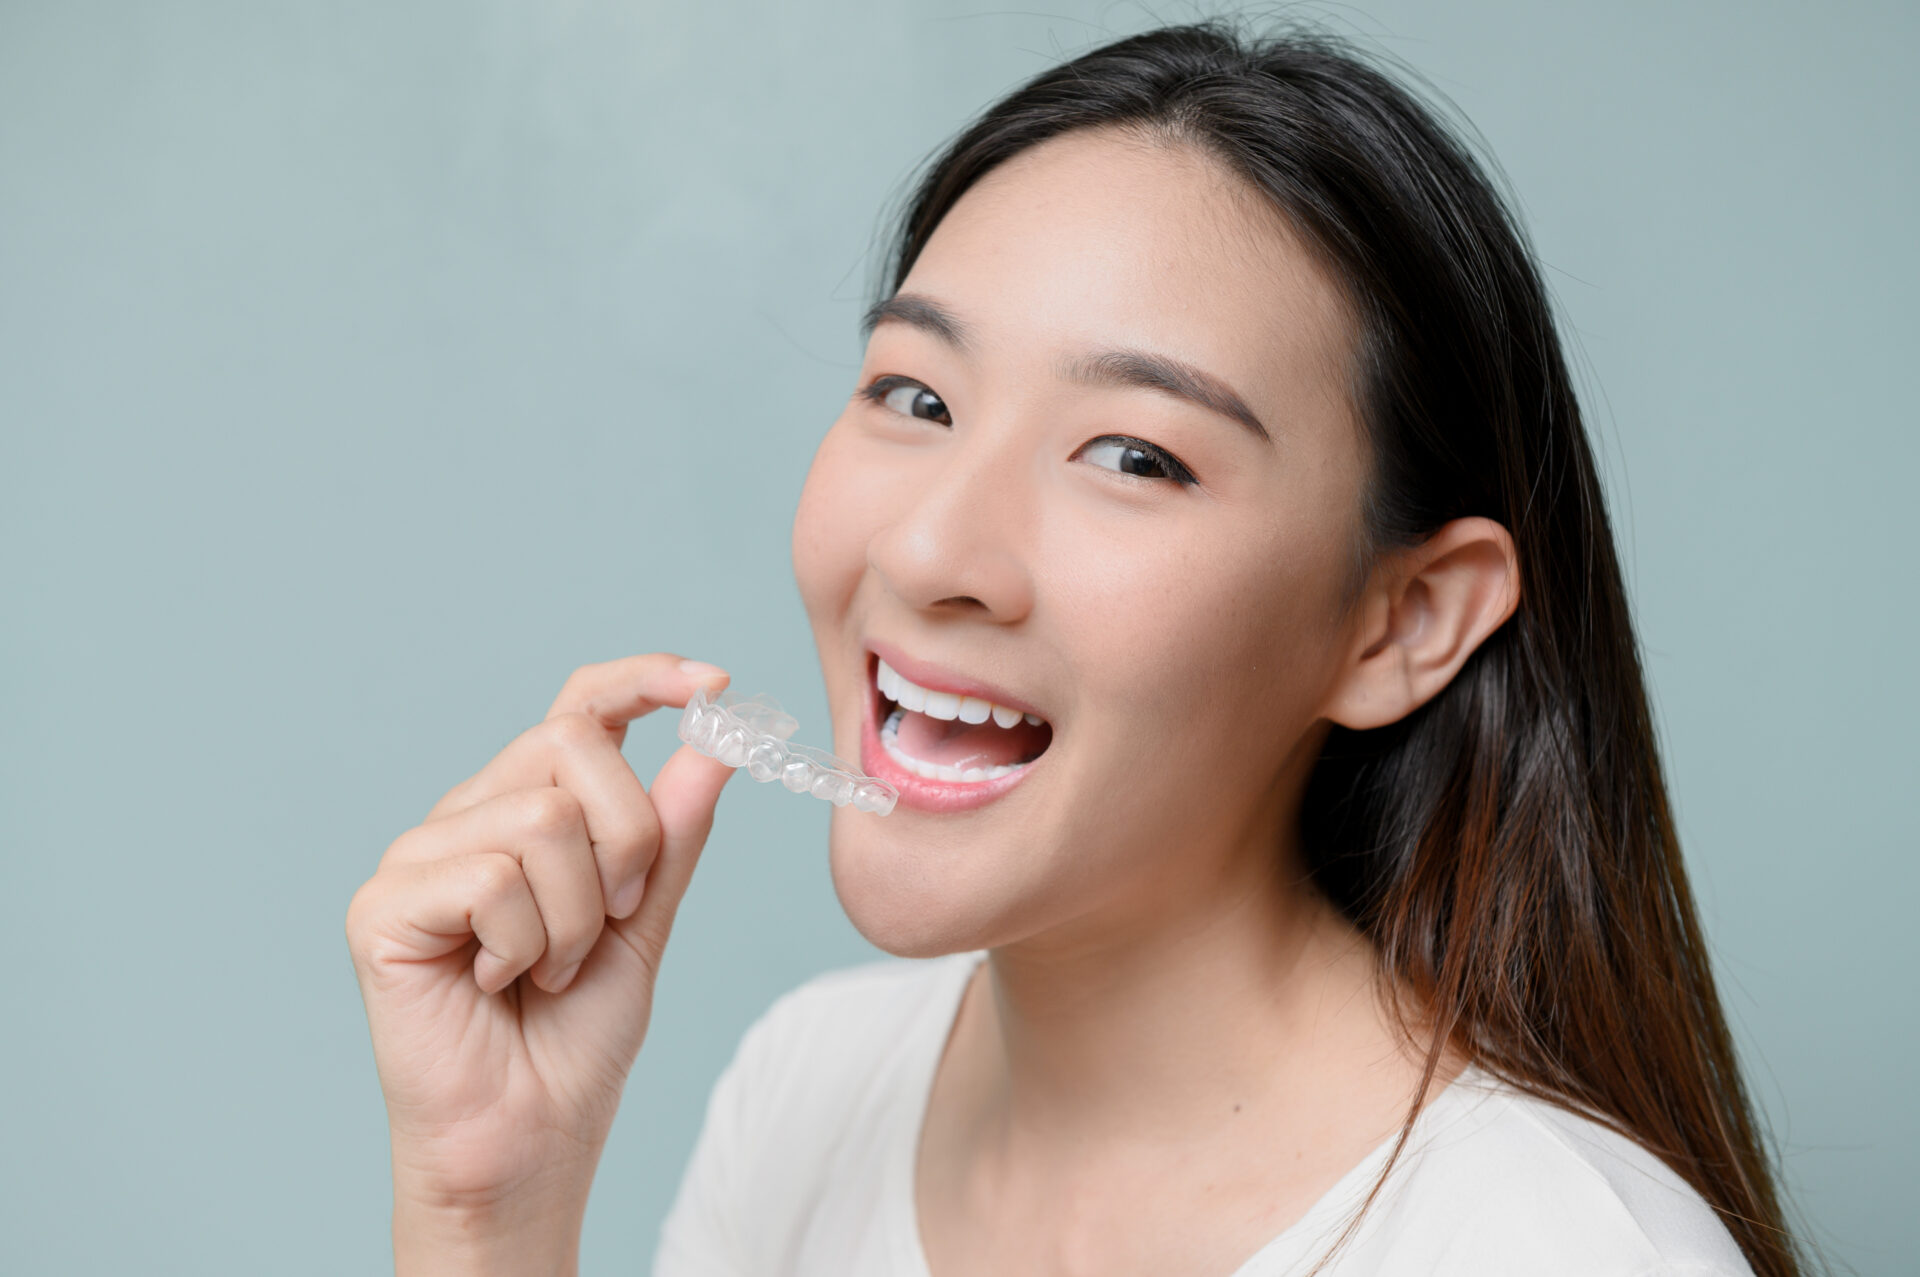 Woman wearing orthodontic silicone trainer. Mobile orthodontic appliance for dental correction. tooth whitening systems.